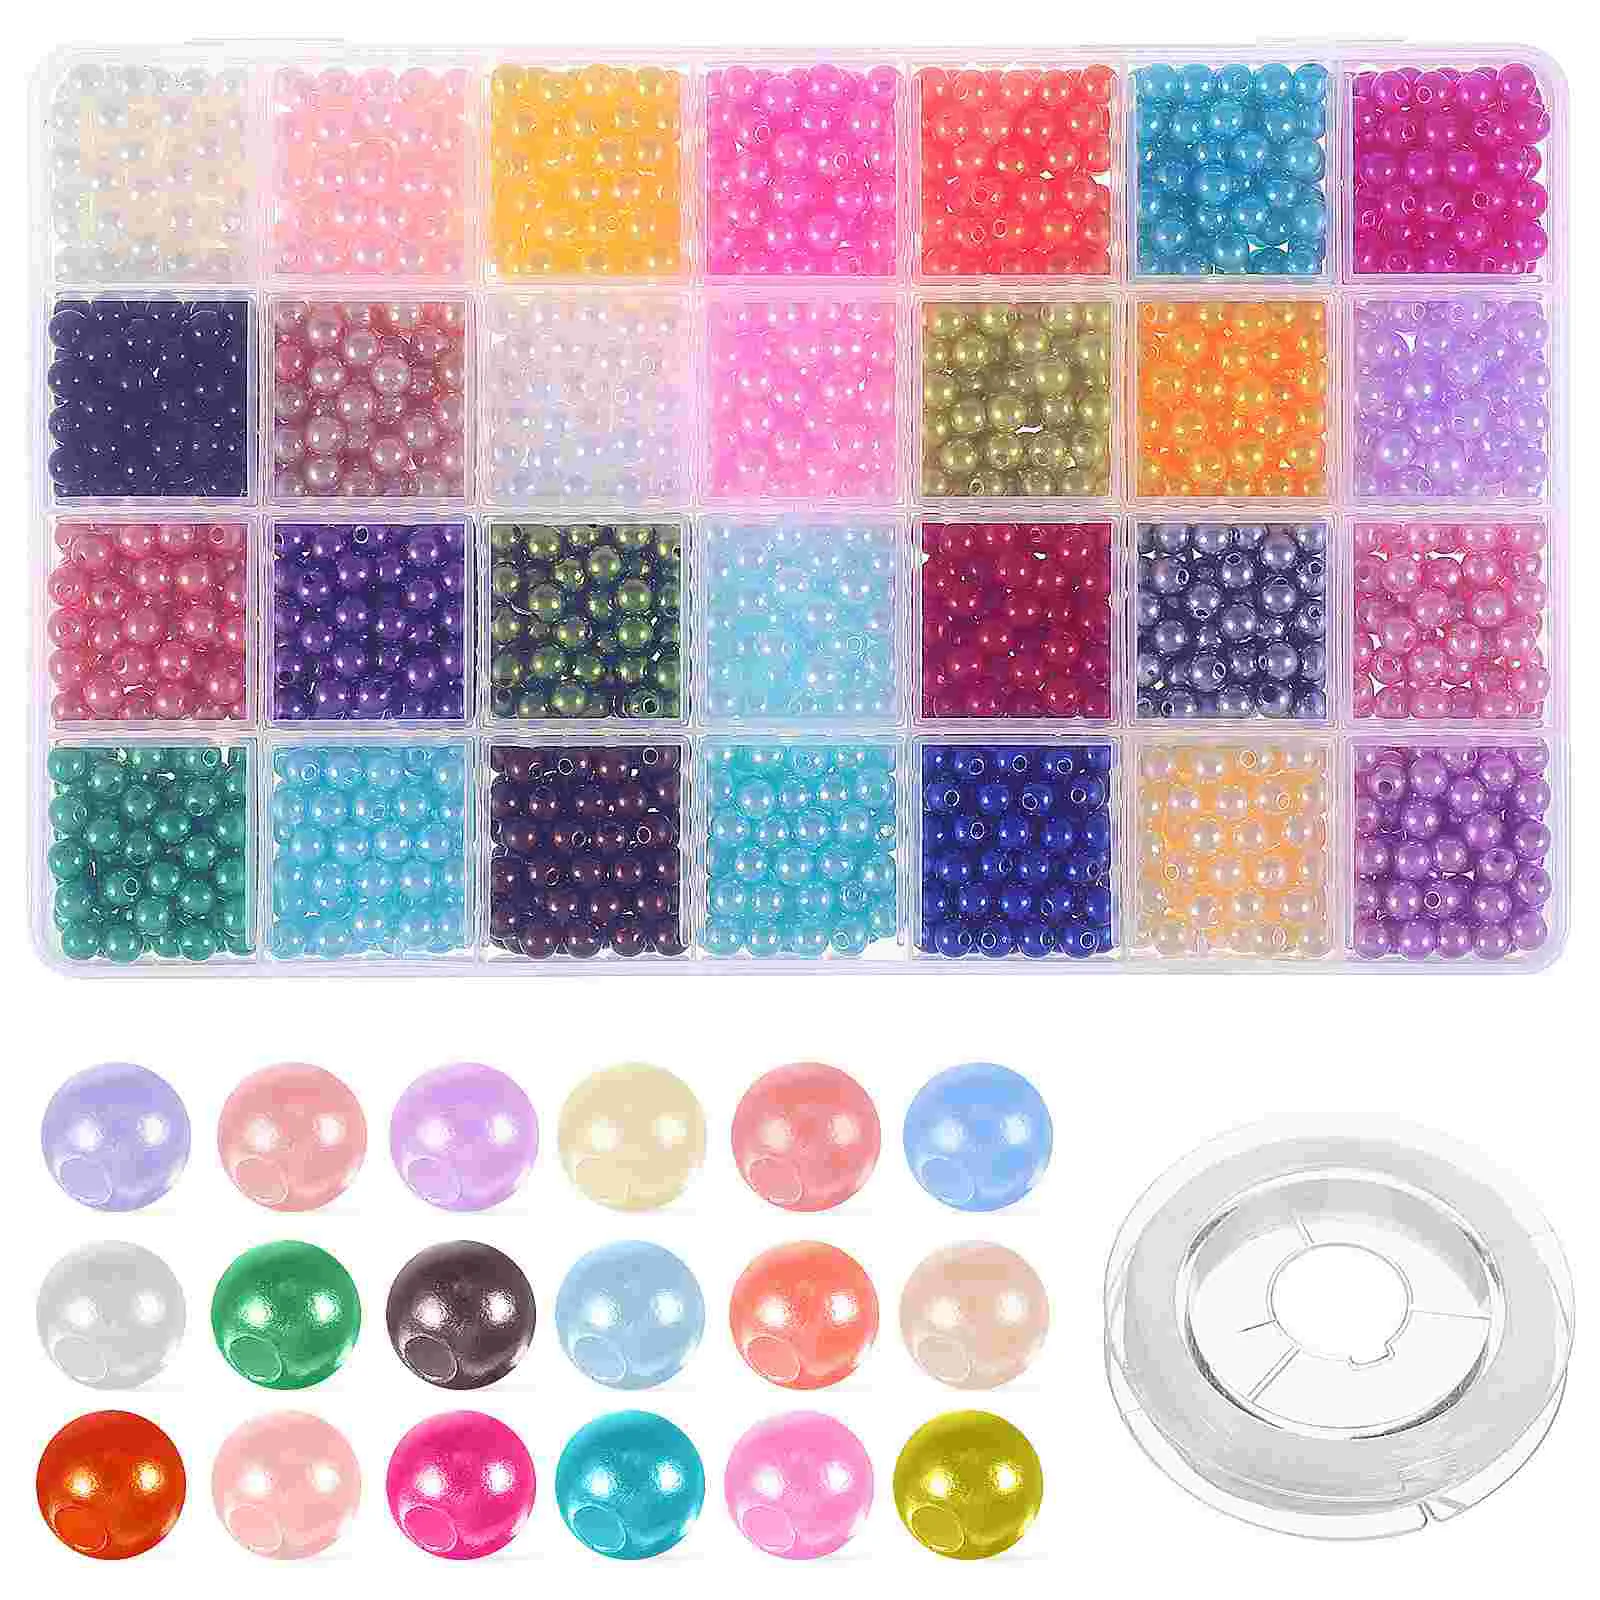 

1960 Pcs Colorful Jewelry Round Beads Threading Making Scattered Loose Imitation Pearls Craft Faux